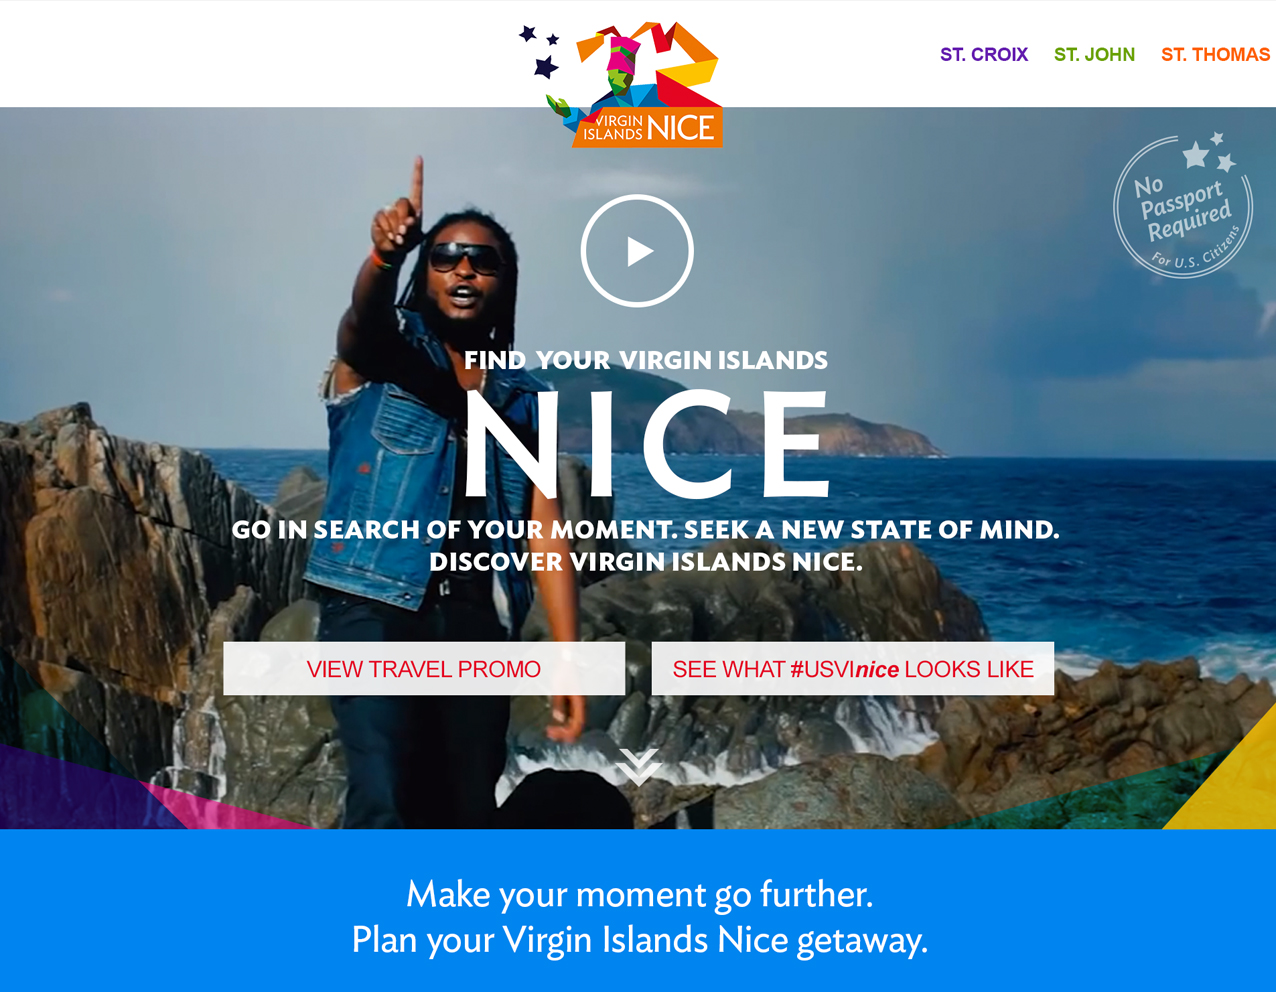 Virgin Islands Tourism Kicks Off Its 'So Nice' Advertising Campaign Featuring Reggae Star Pressure Busspipe